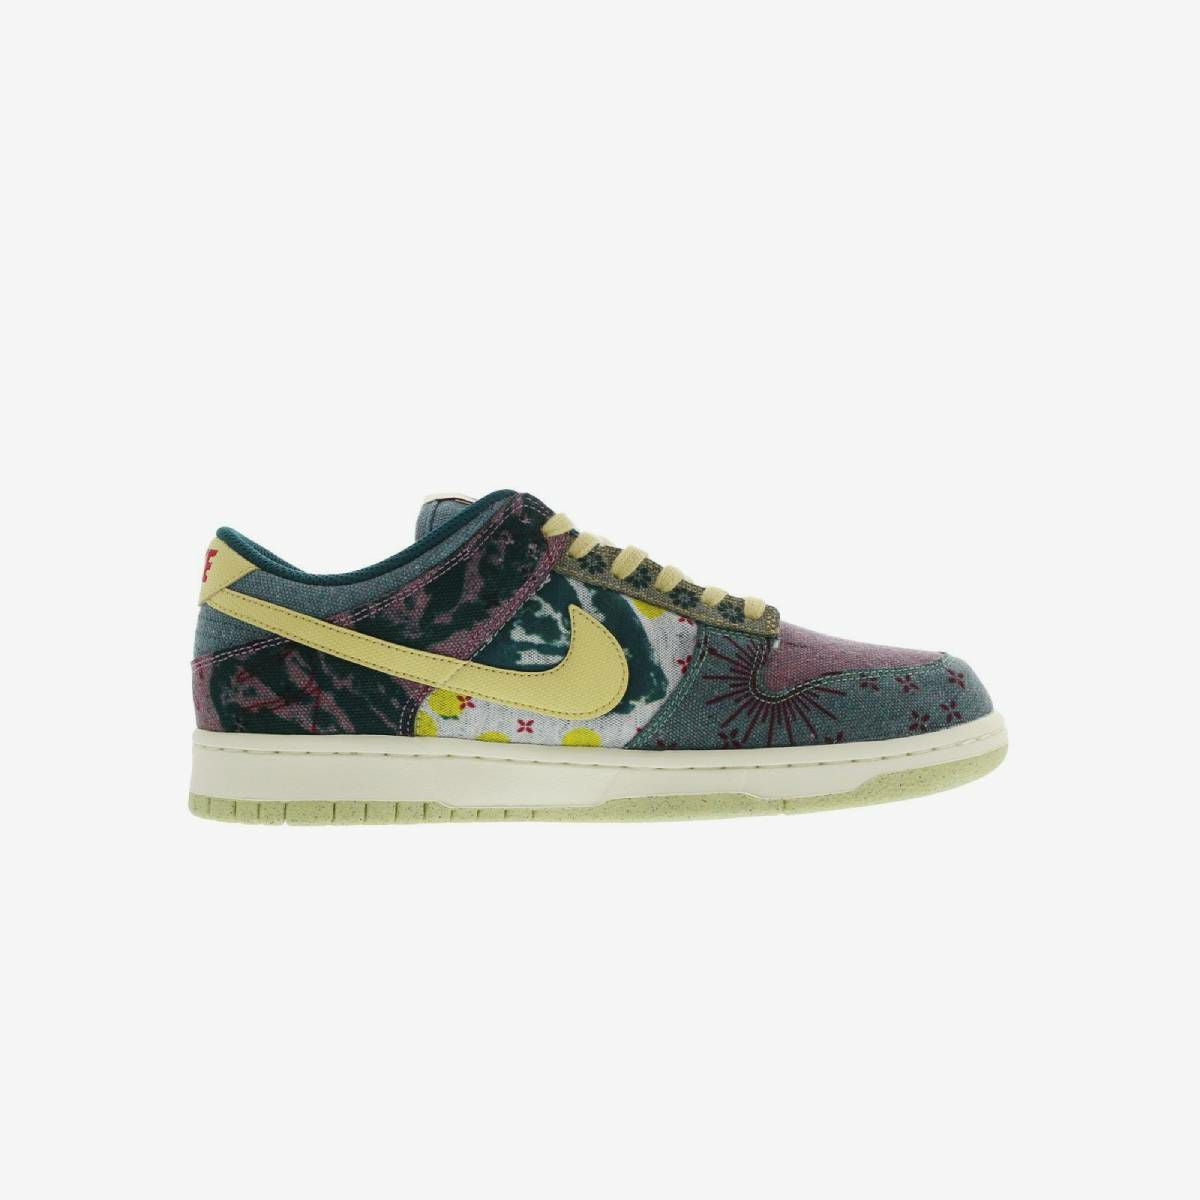 NIKE DUNK LOW SP MULTI COLOR/MIDNIGHT TURQUOISE/CARDINAL RED/LEMON 